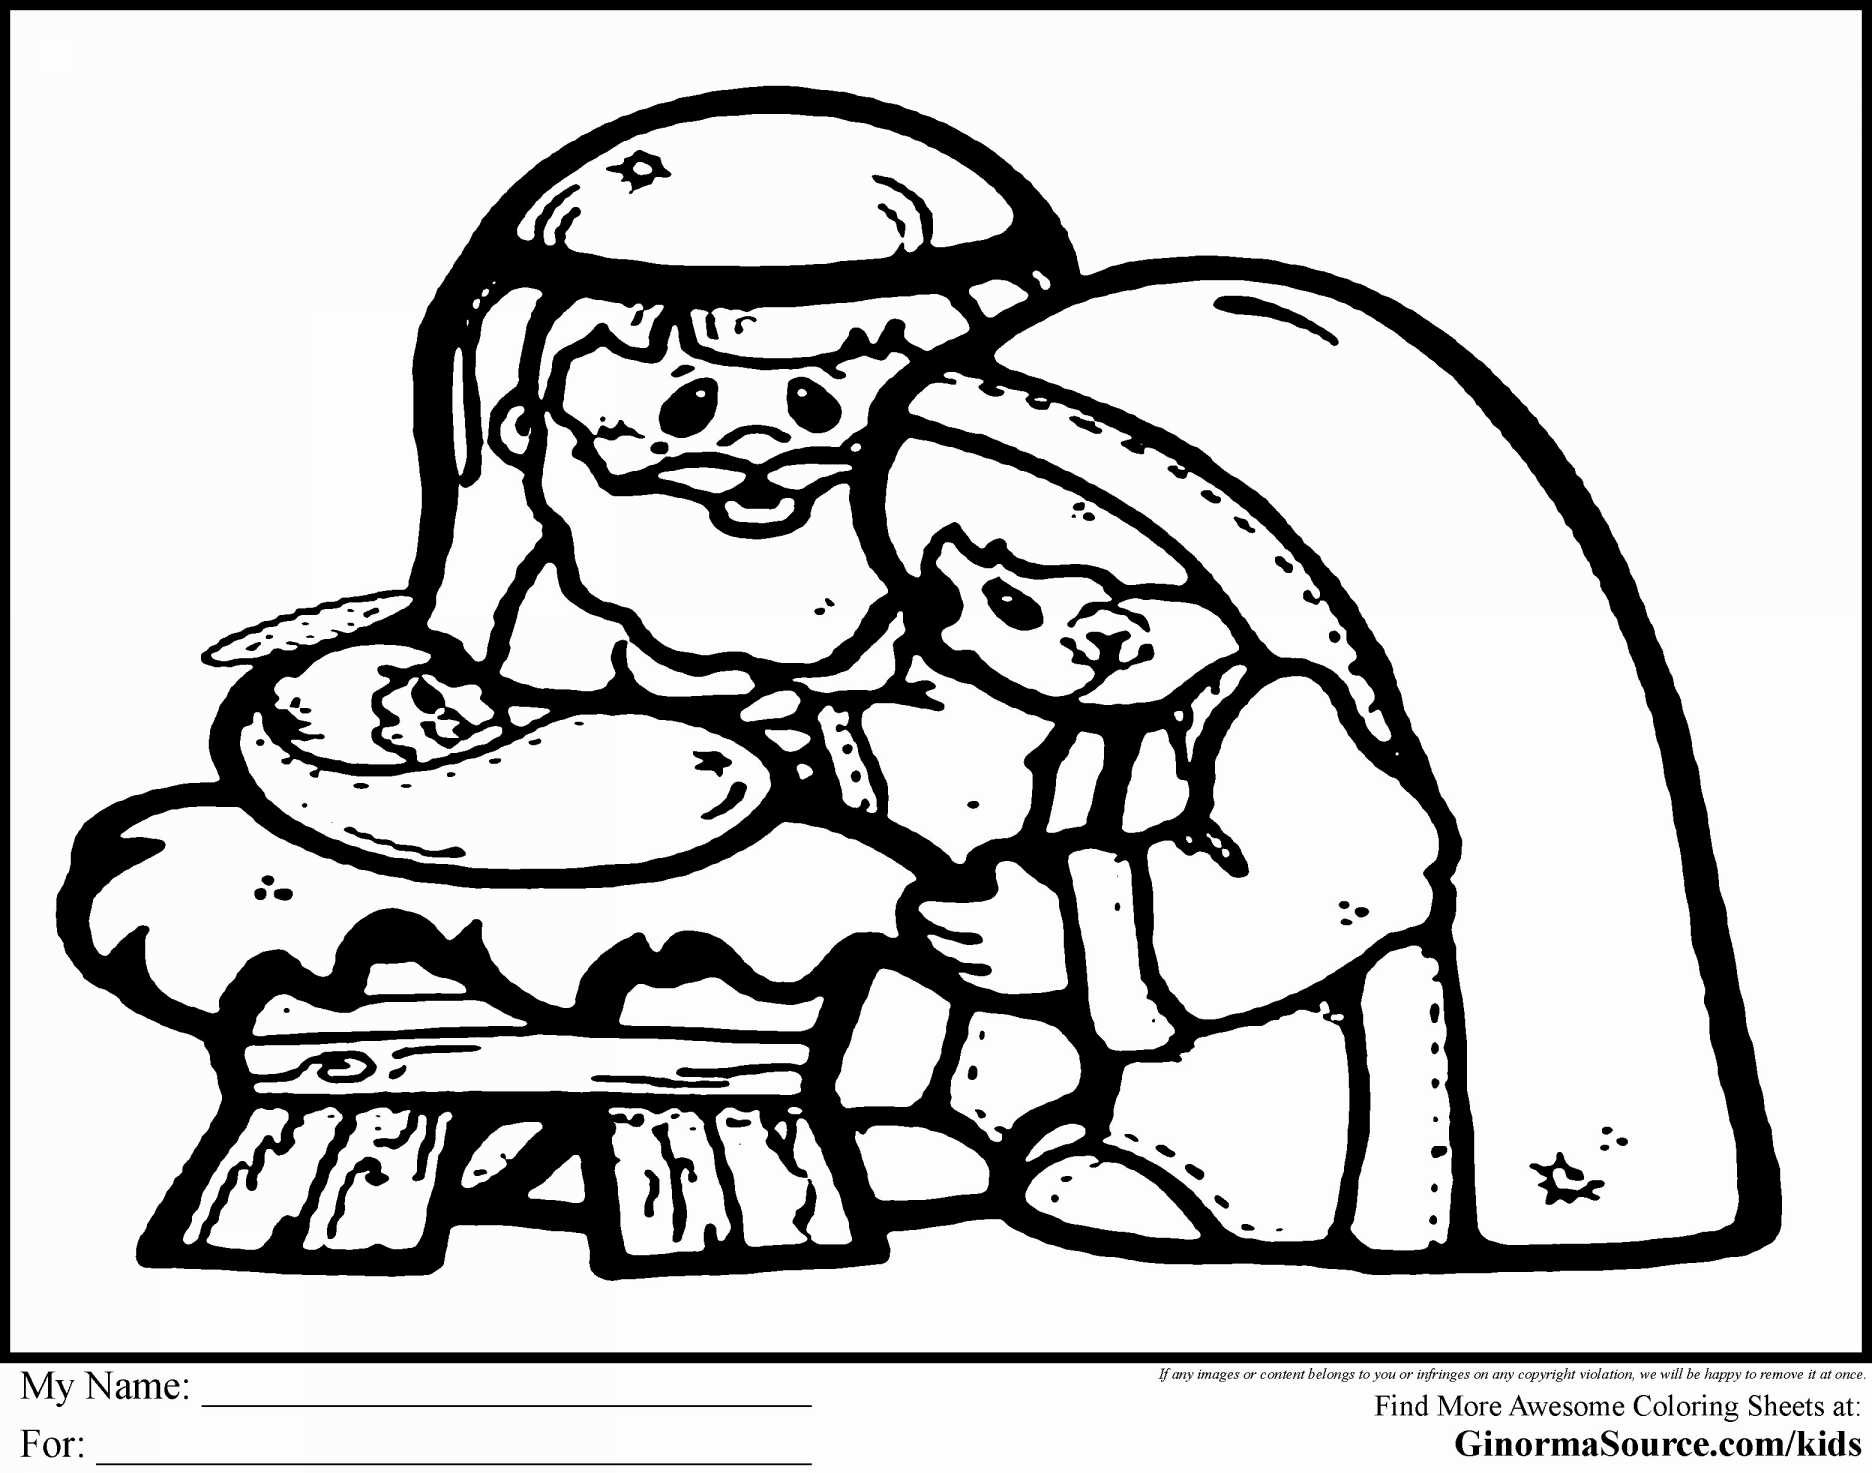 Jesus Christmas Coloring Pages Coloring Pages Phenomenal Christmas Coloring Pages Pdf Image Ideas